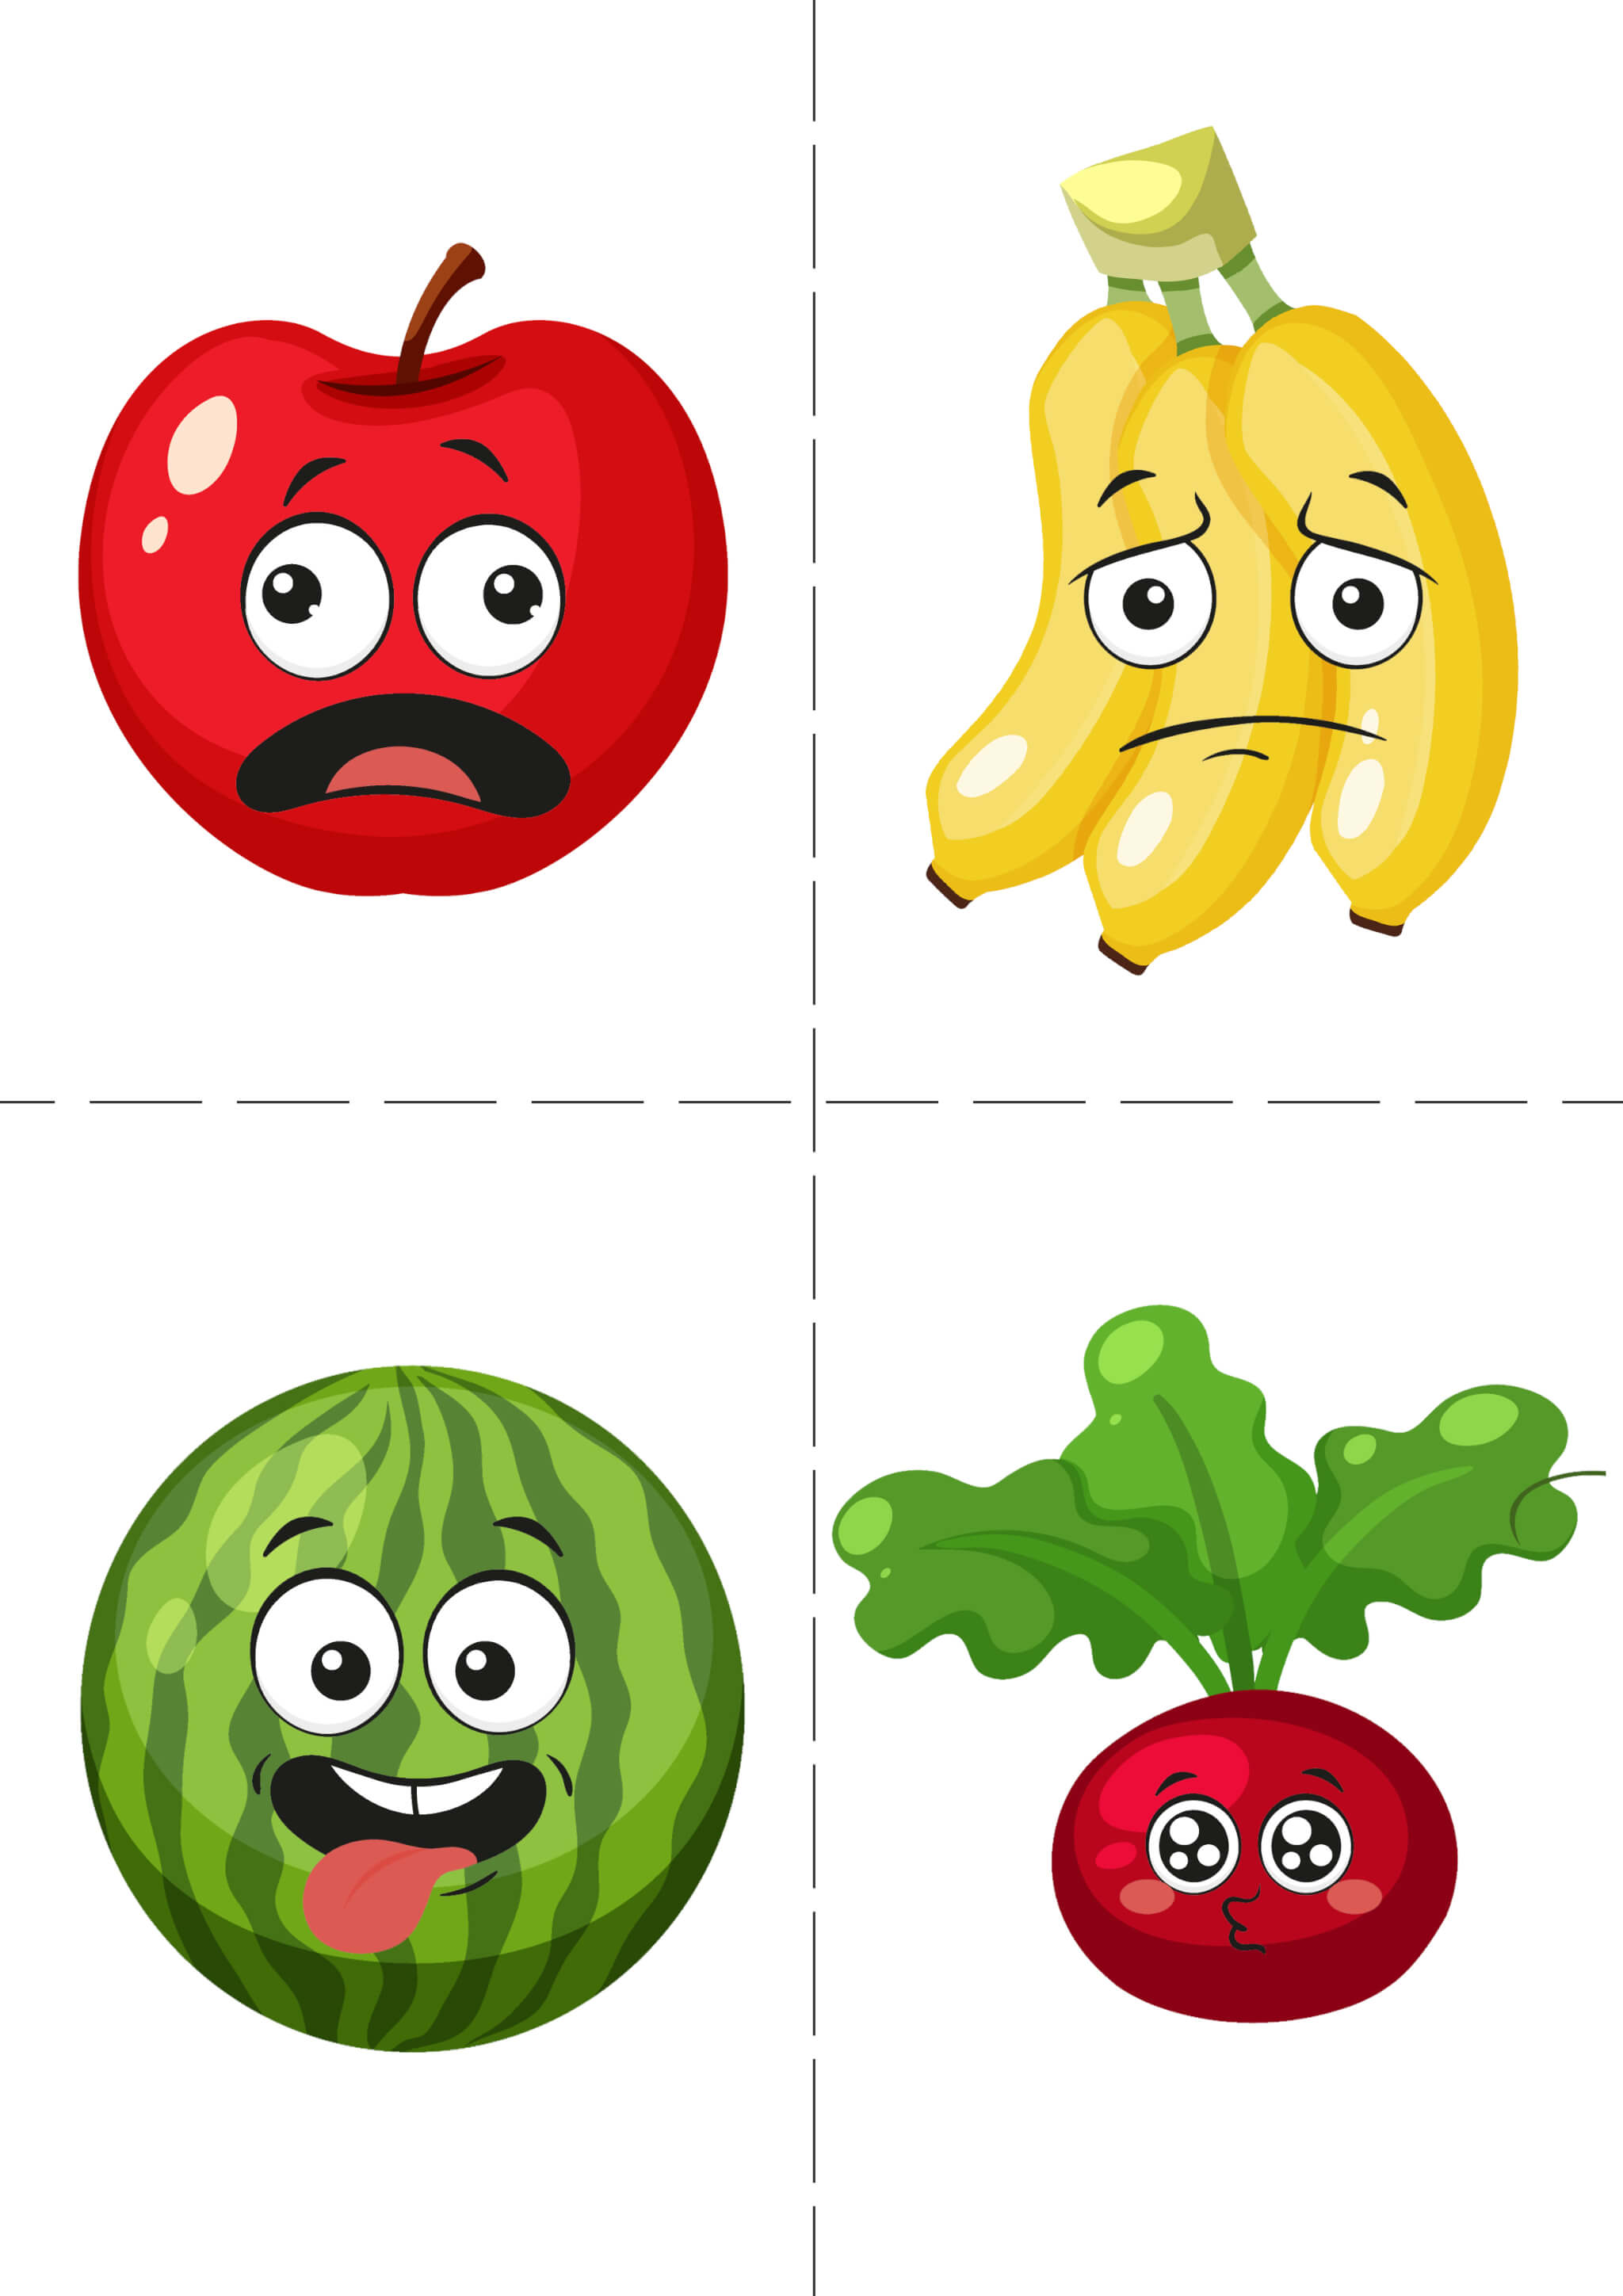 Fruits and Vegetables Emotions Flashcards - Image 3